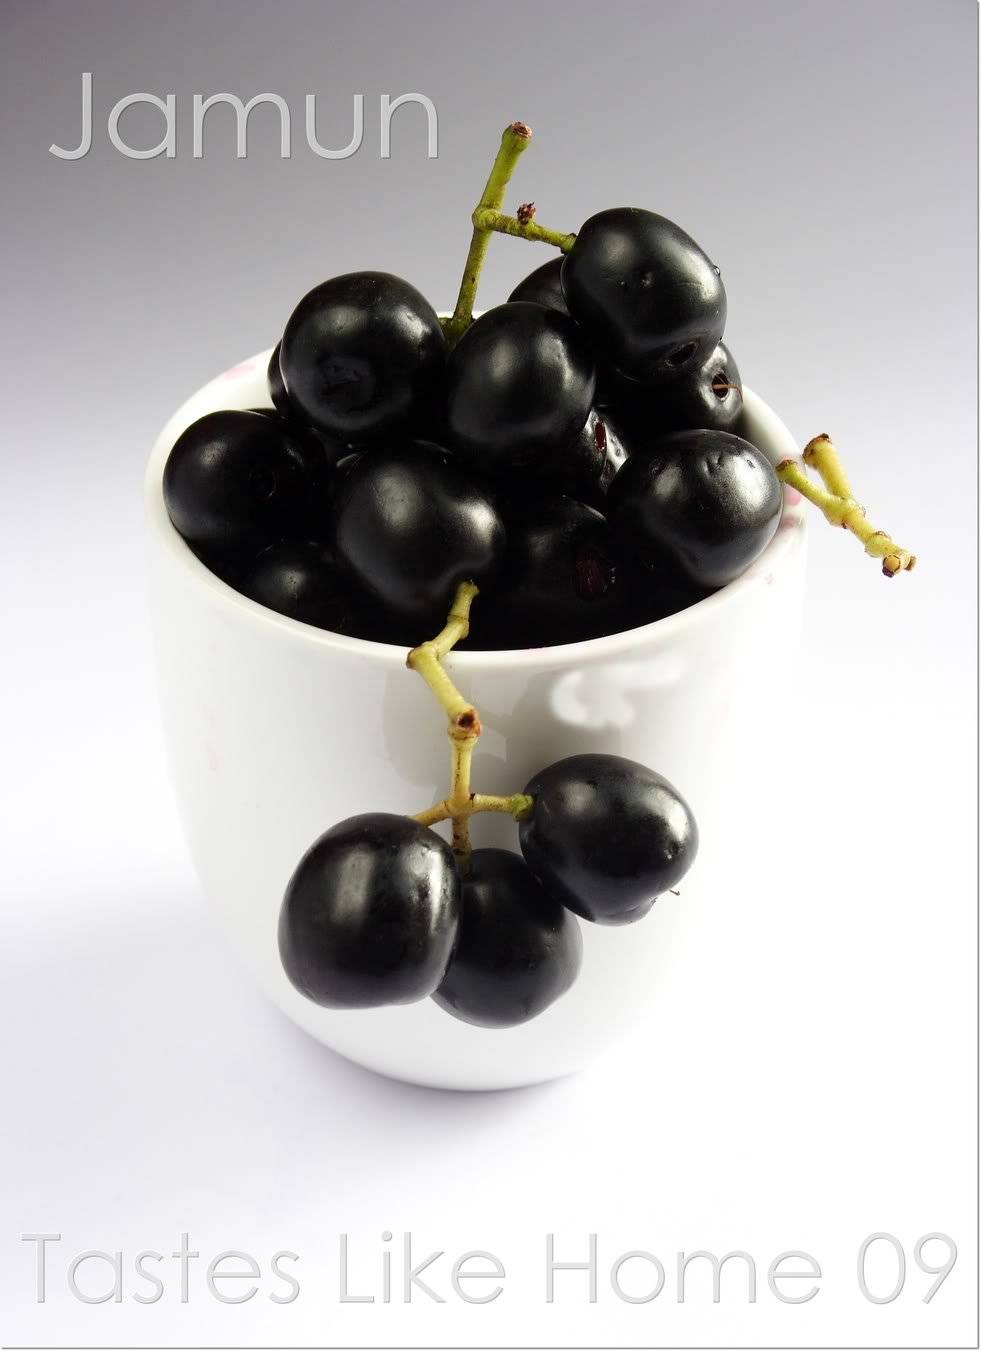 This image depicts a bowl of jamuns. this post explores if jamuns can be patented. Click on the image to read the full post.